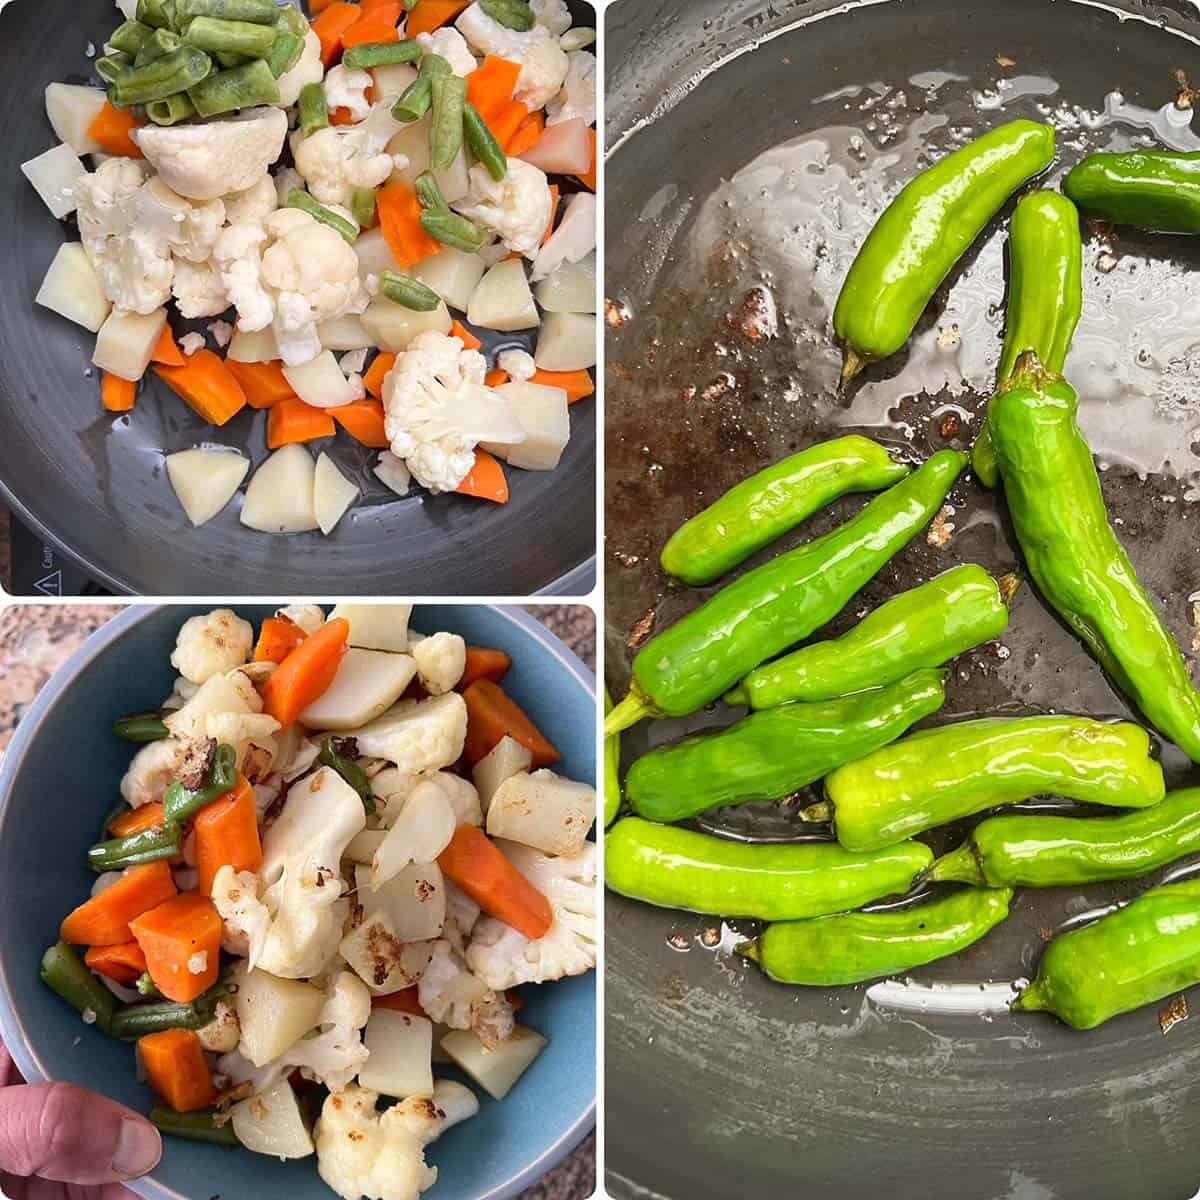 3 panel photo showing the sautéing of vegetables.